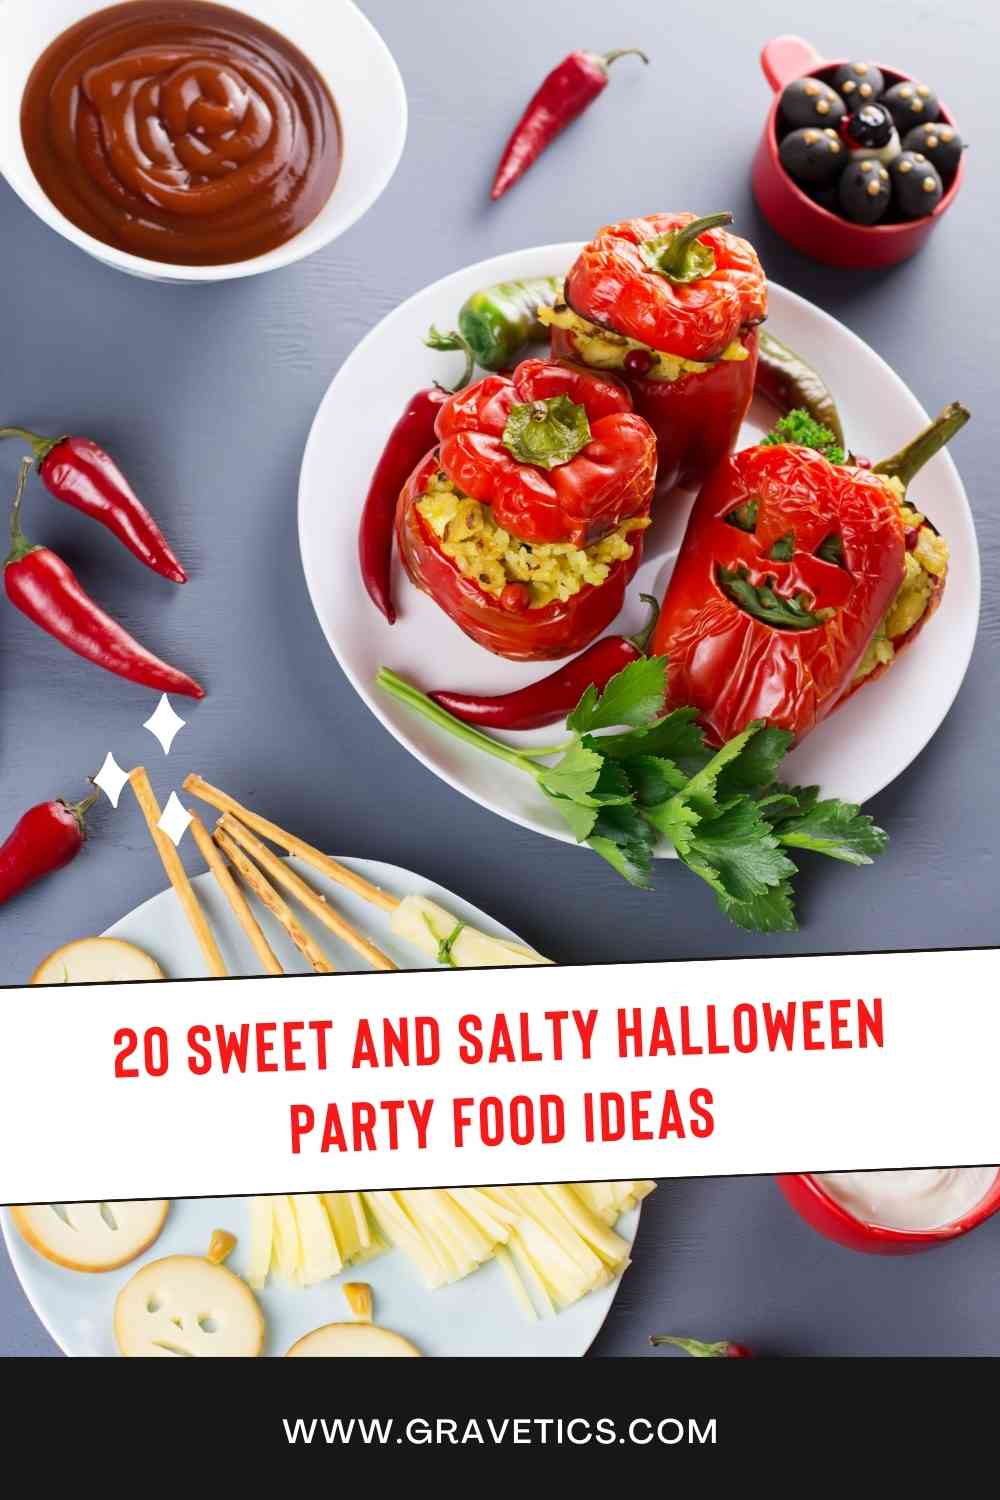 20 Sweet And Salty Halloween Party Food Ideas